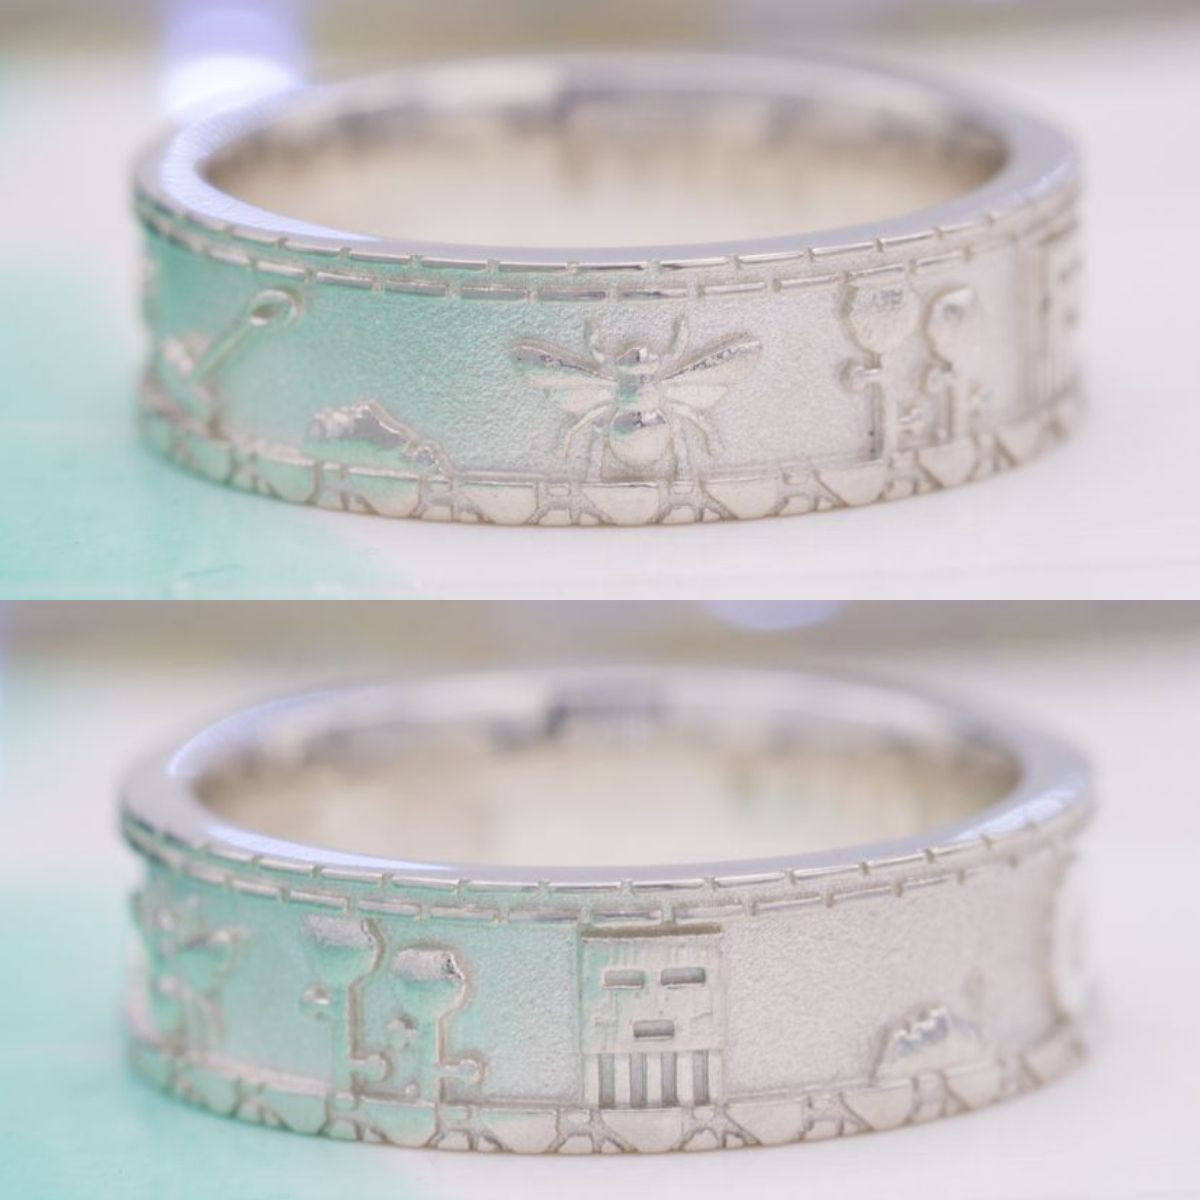 Nerdy Wedding Bands
 Geeky Engagement Rings Nerdy Wedding Bands